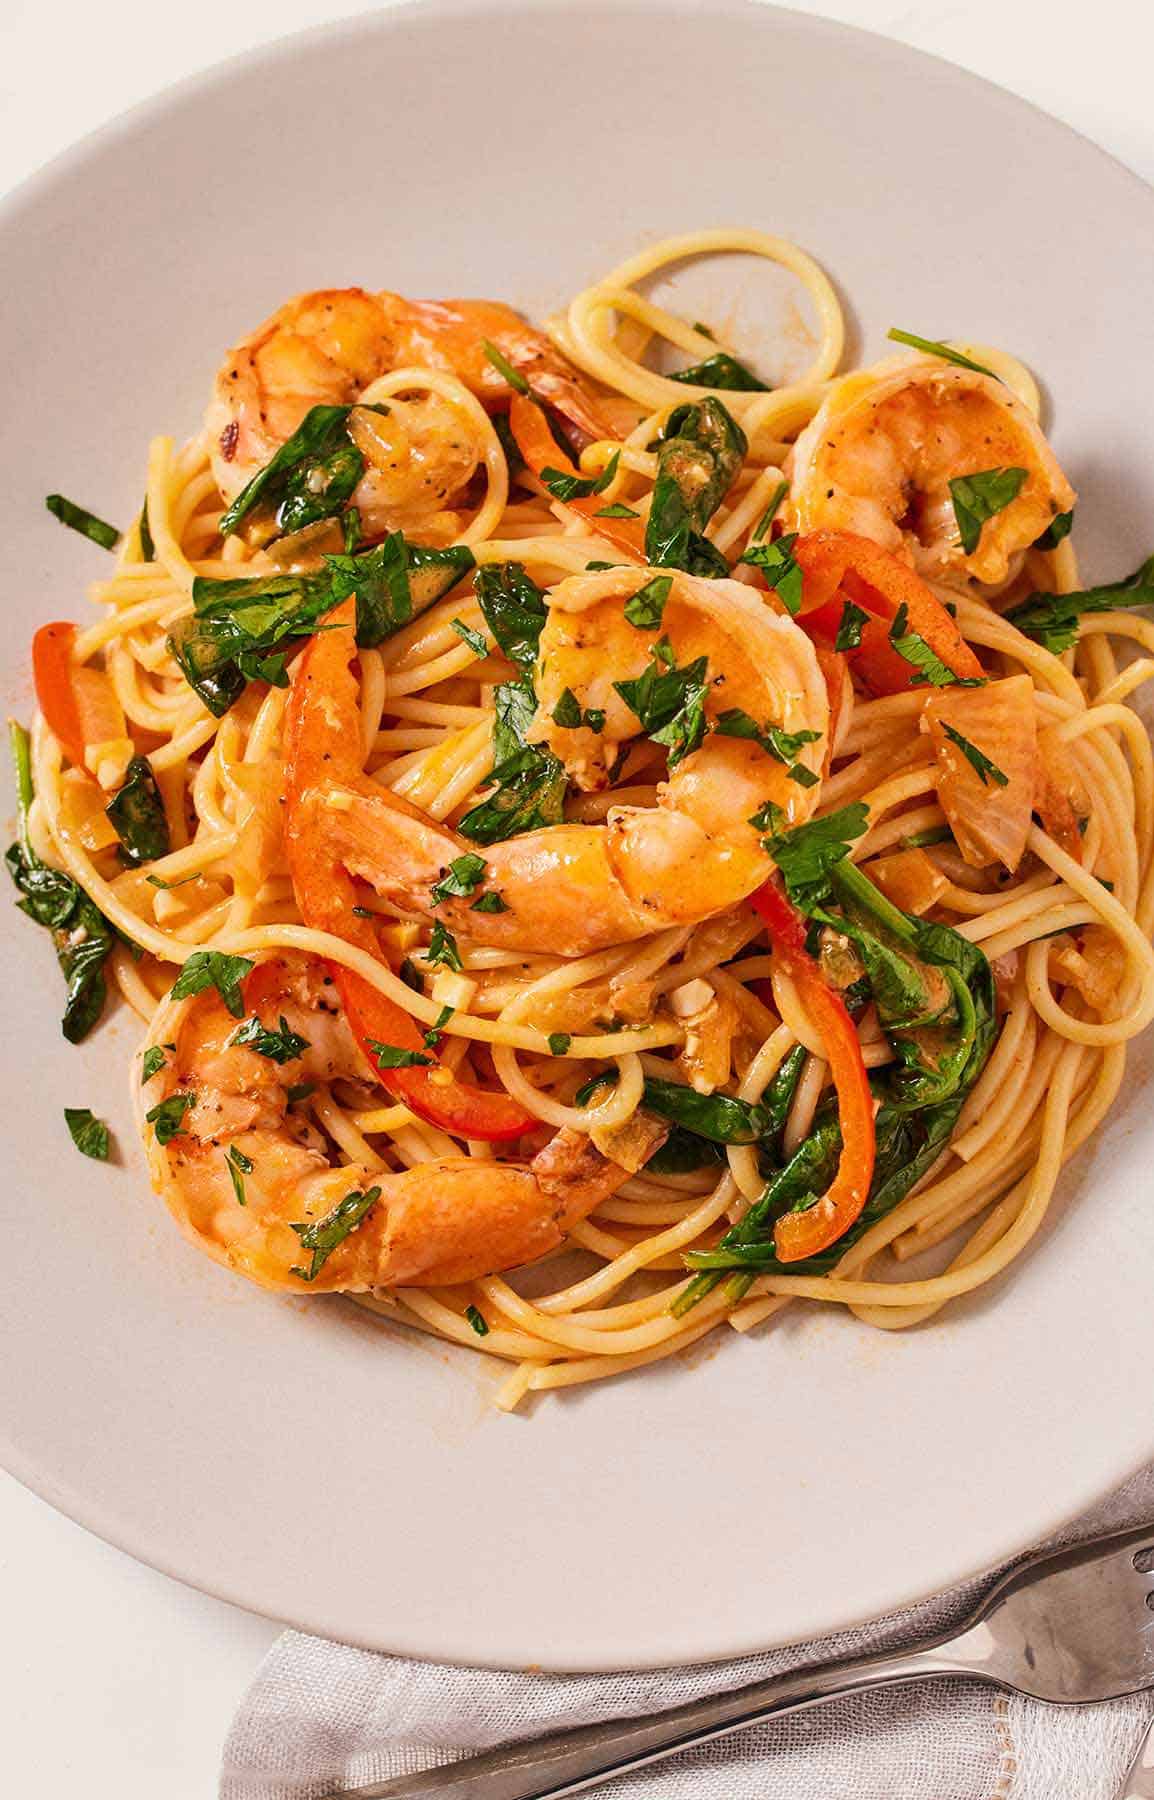 Overhead view of a plate of red curry pasta with shrimp with fresh chopped herb garnish.